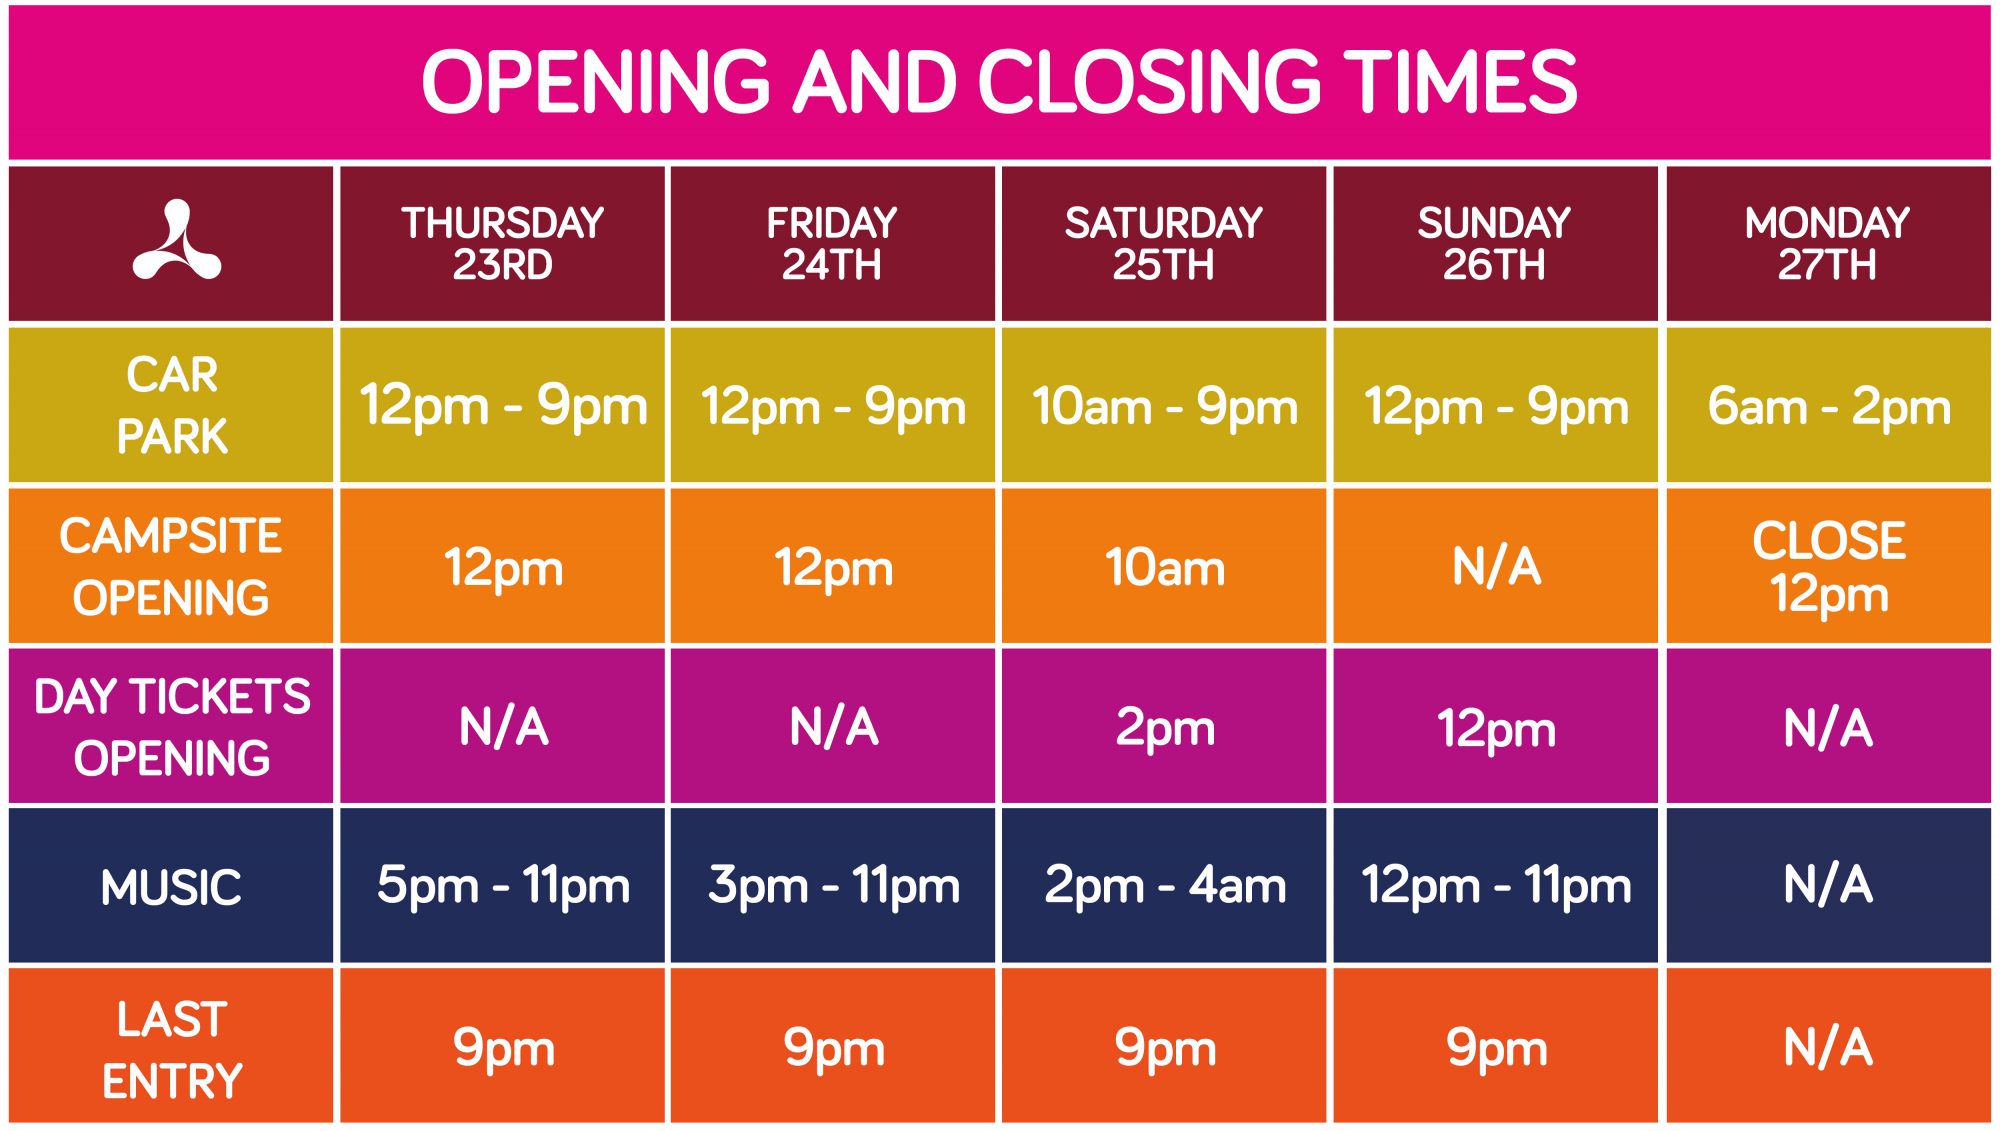 Creamfields UK 2018 Open and Closing Times